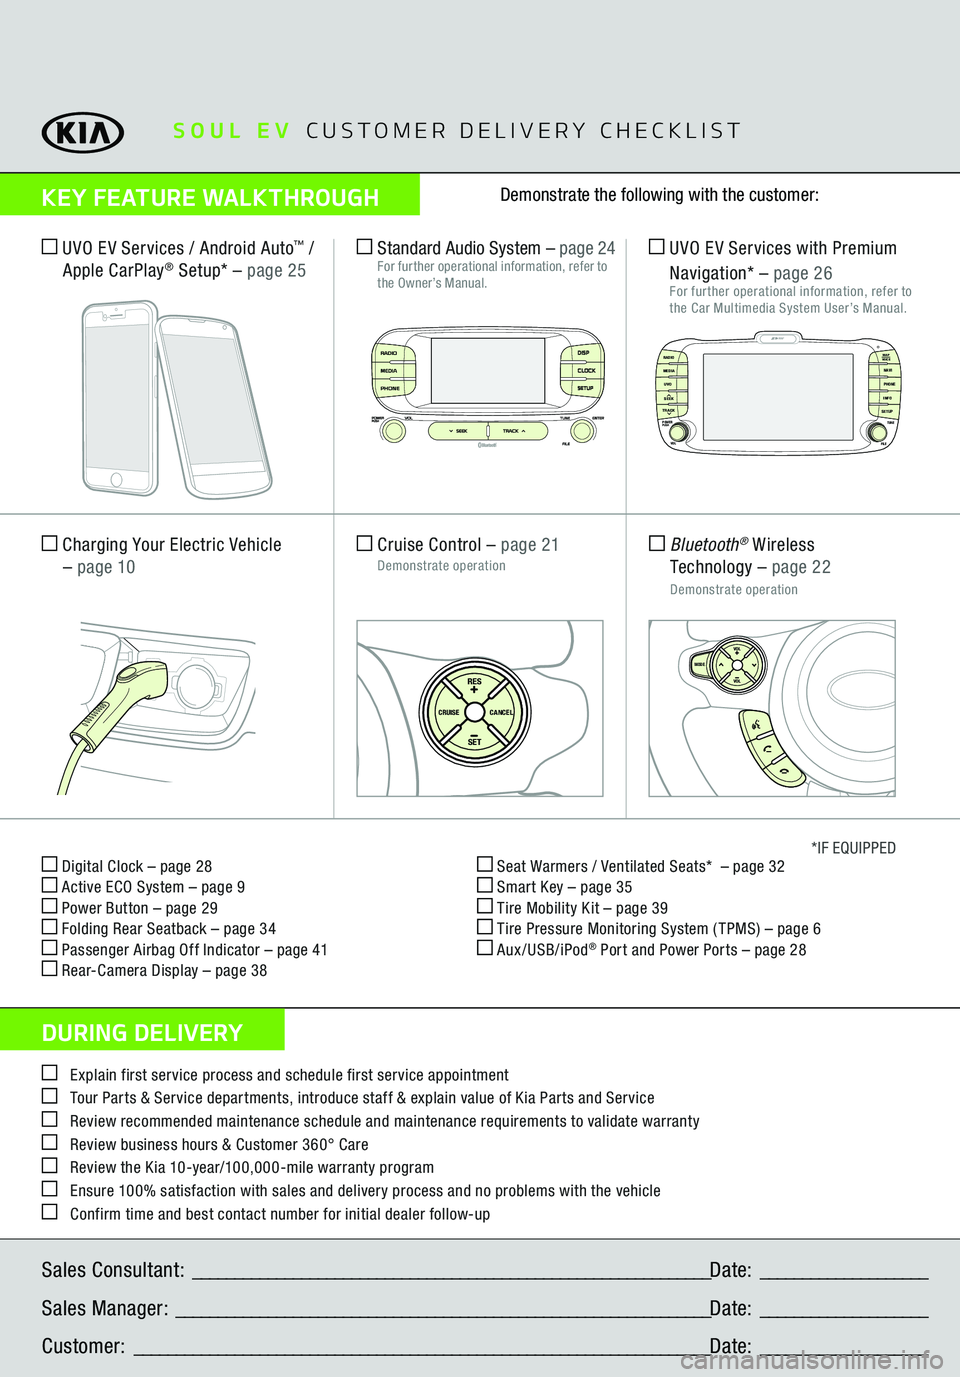 KIA SOUL EV 2018  Features and Functions Guide  Digital Clock – page 28 Active ECO System – page 9 Power Button – page 29 Folding Rear Seatback – page 34 Passenger Airbag Off Indicator – page 41 Rear-Camera Display – page 38
 Seat Warm